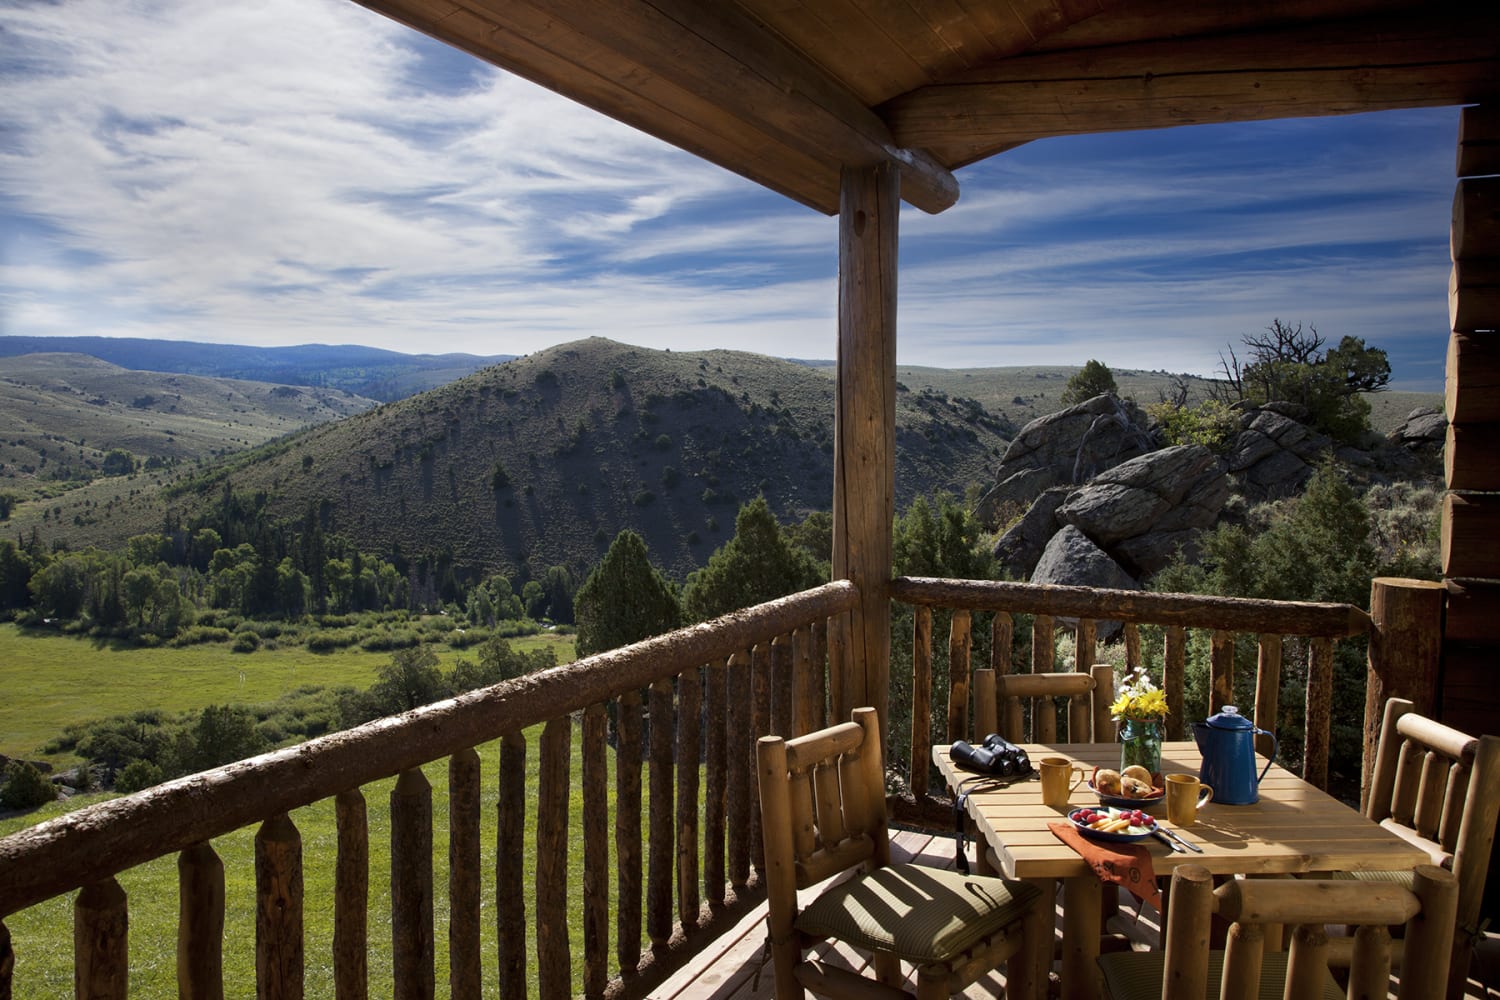 12 of the best romantic getaways in the United States